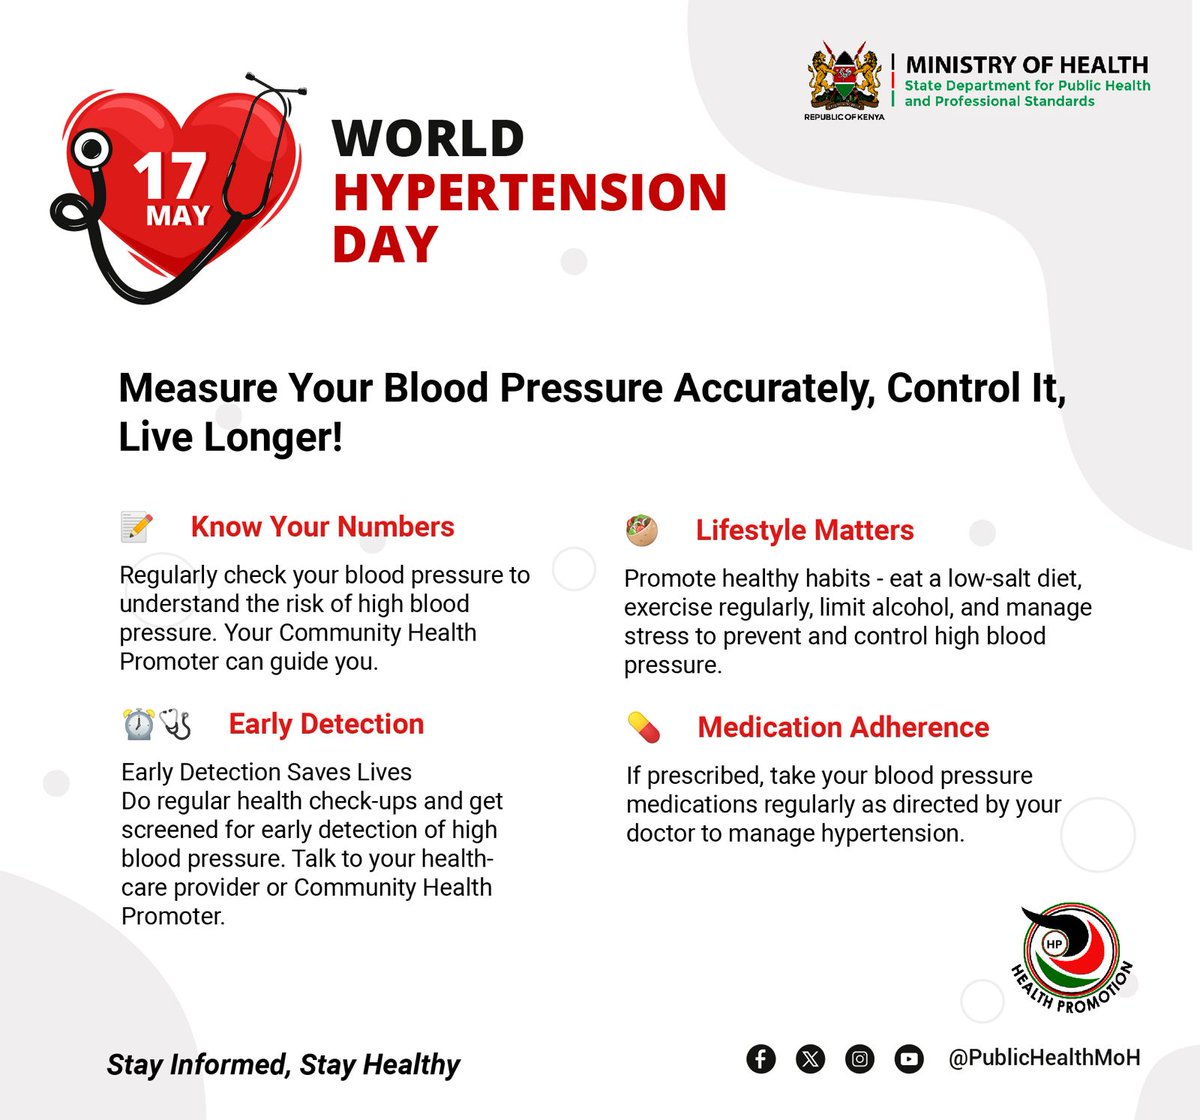 Today is World Hypertension Day,the theme is :'Measure Your Blood Pressure Accurately, Control It, Live Longer!'. #AfyaNyumbani #WorldHypertensionDay #NCDs